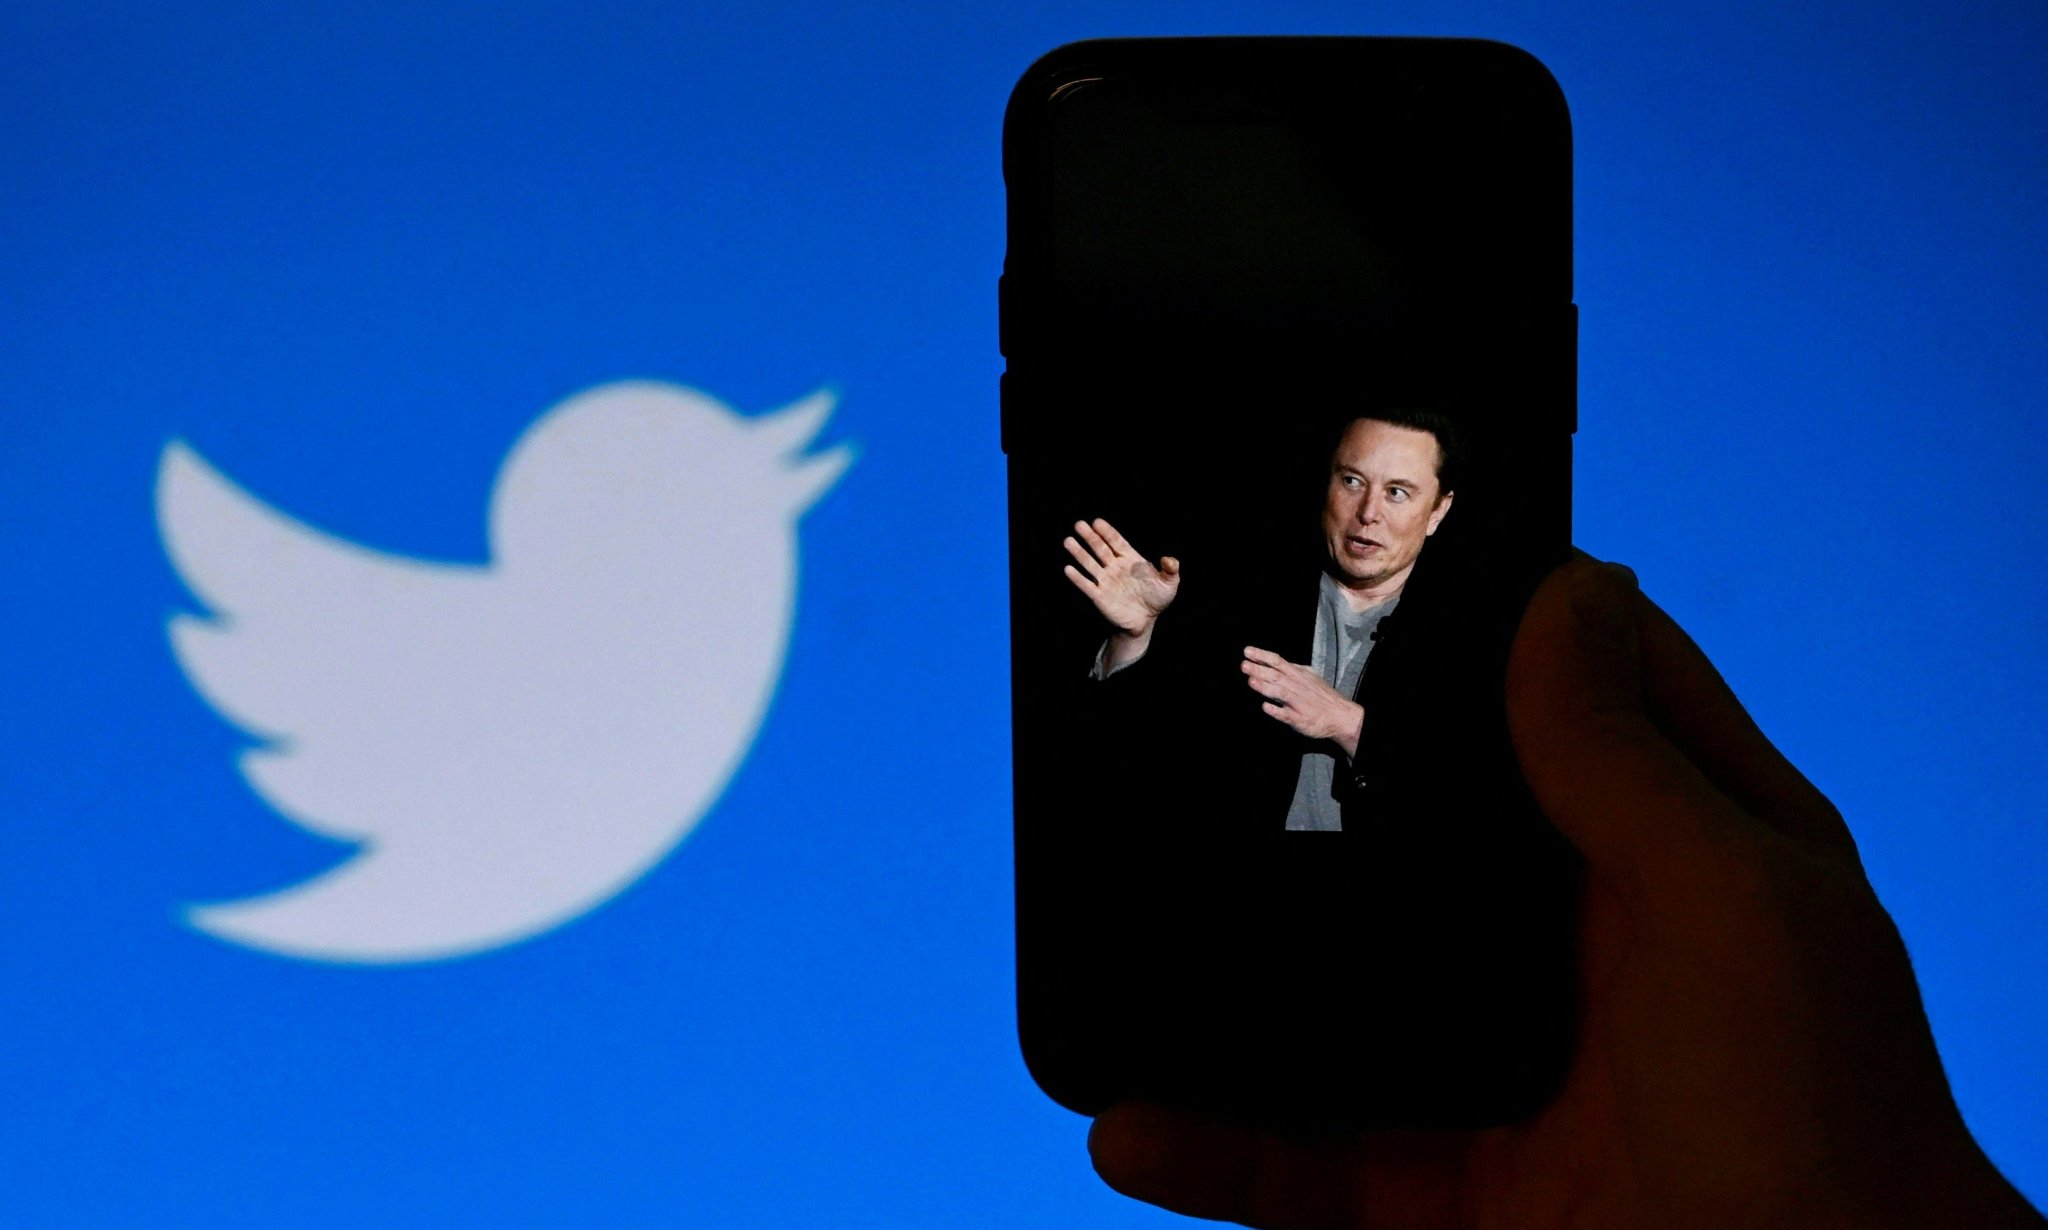 Elon Musk's Twitter is fast proving that free speech at all costs is a dangerous fantasy